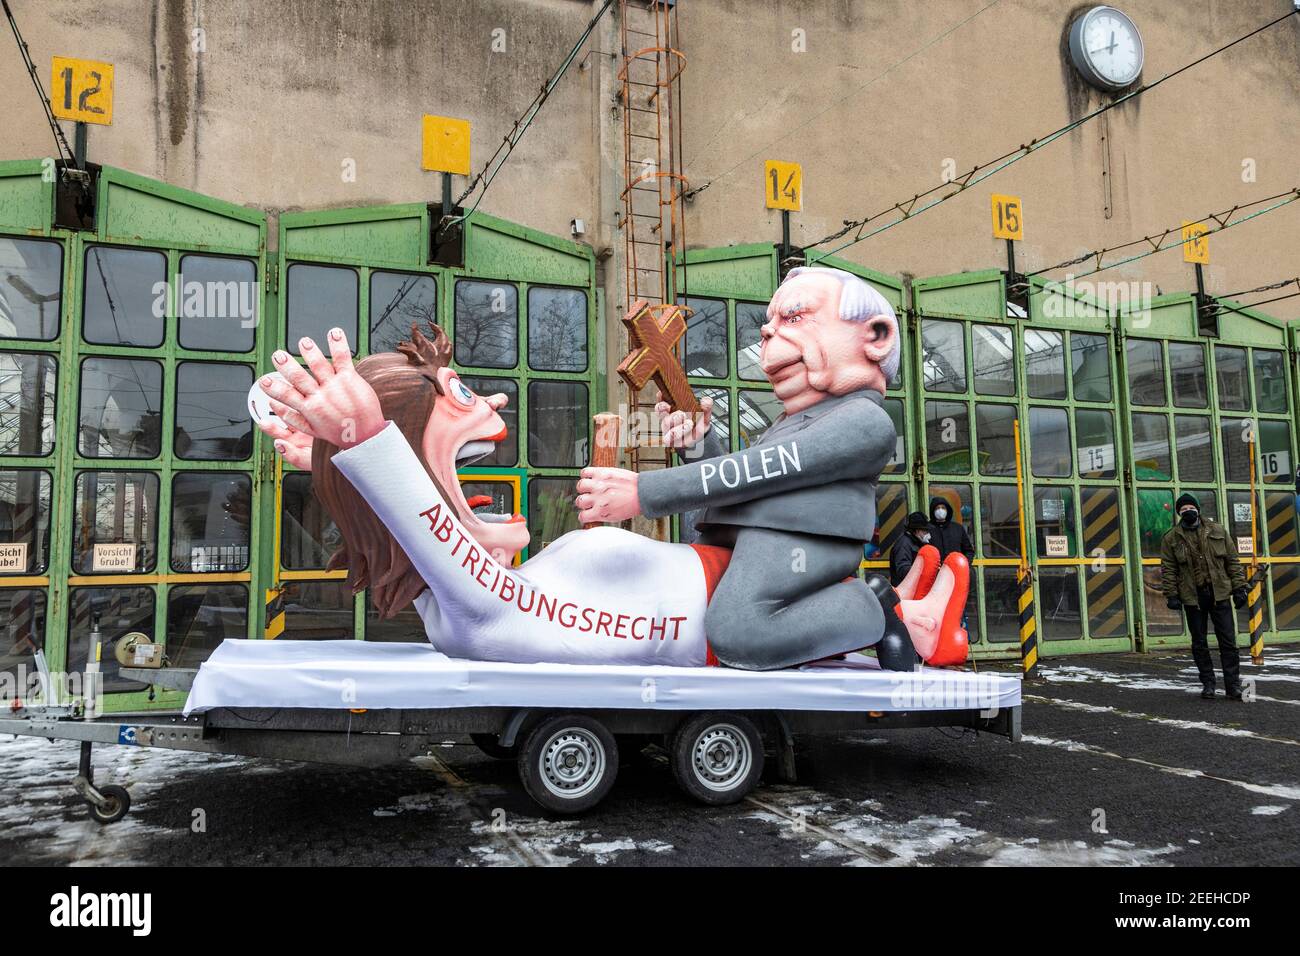 Float about strict abortion laws in Poland. Carnival floats created by German artist Jacques Tilly were presented and later exhibited throughout Dusseldorf as the main carnival parade was cancelled due to the coronavirus pandemic. Stock Photo